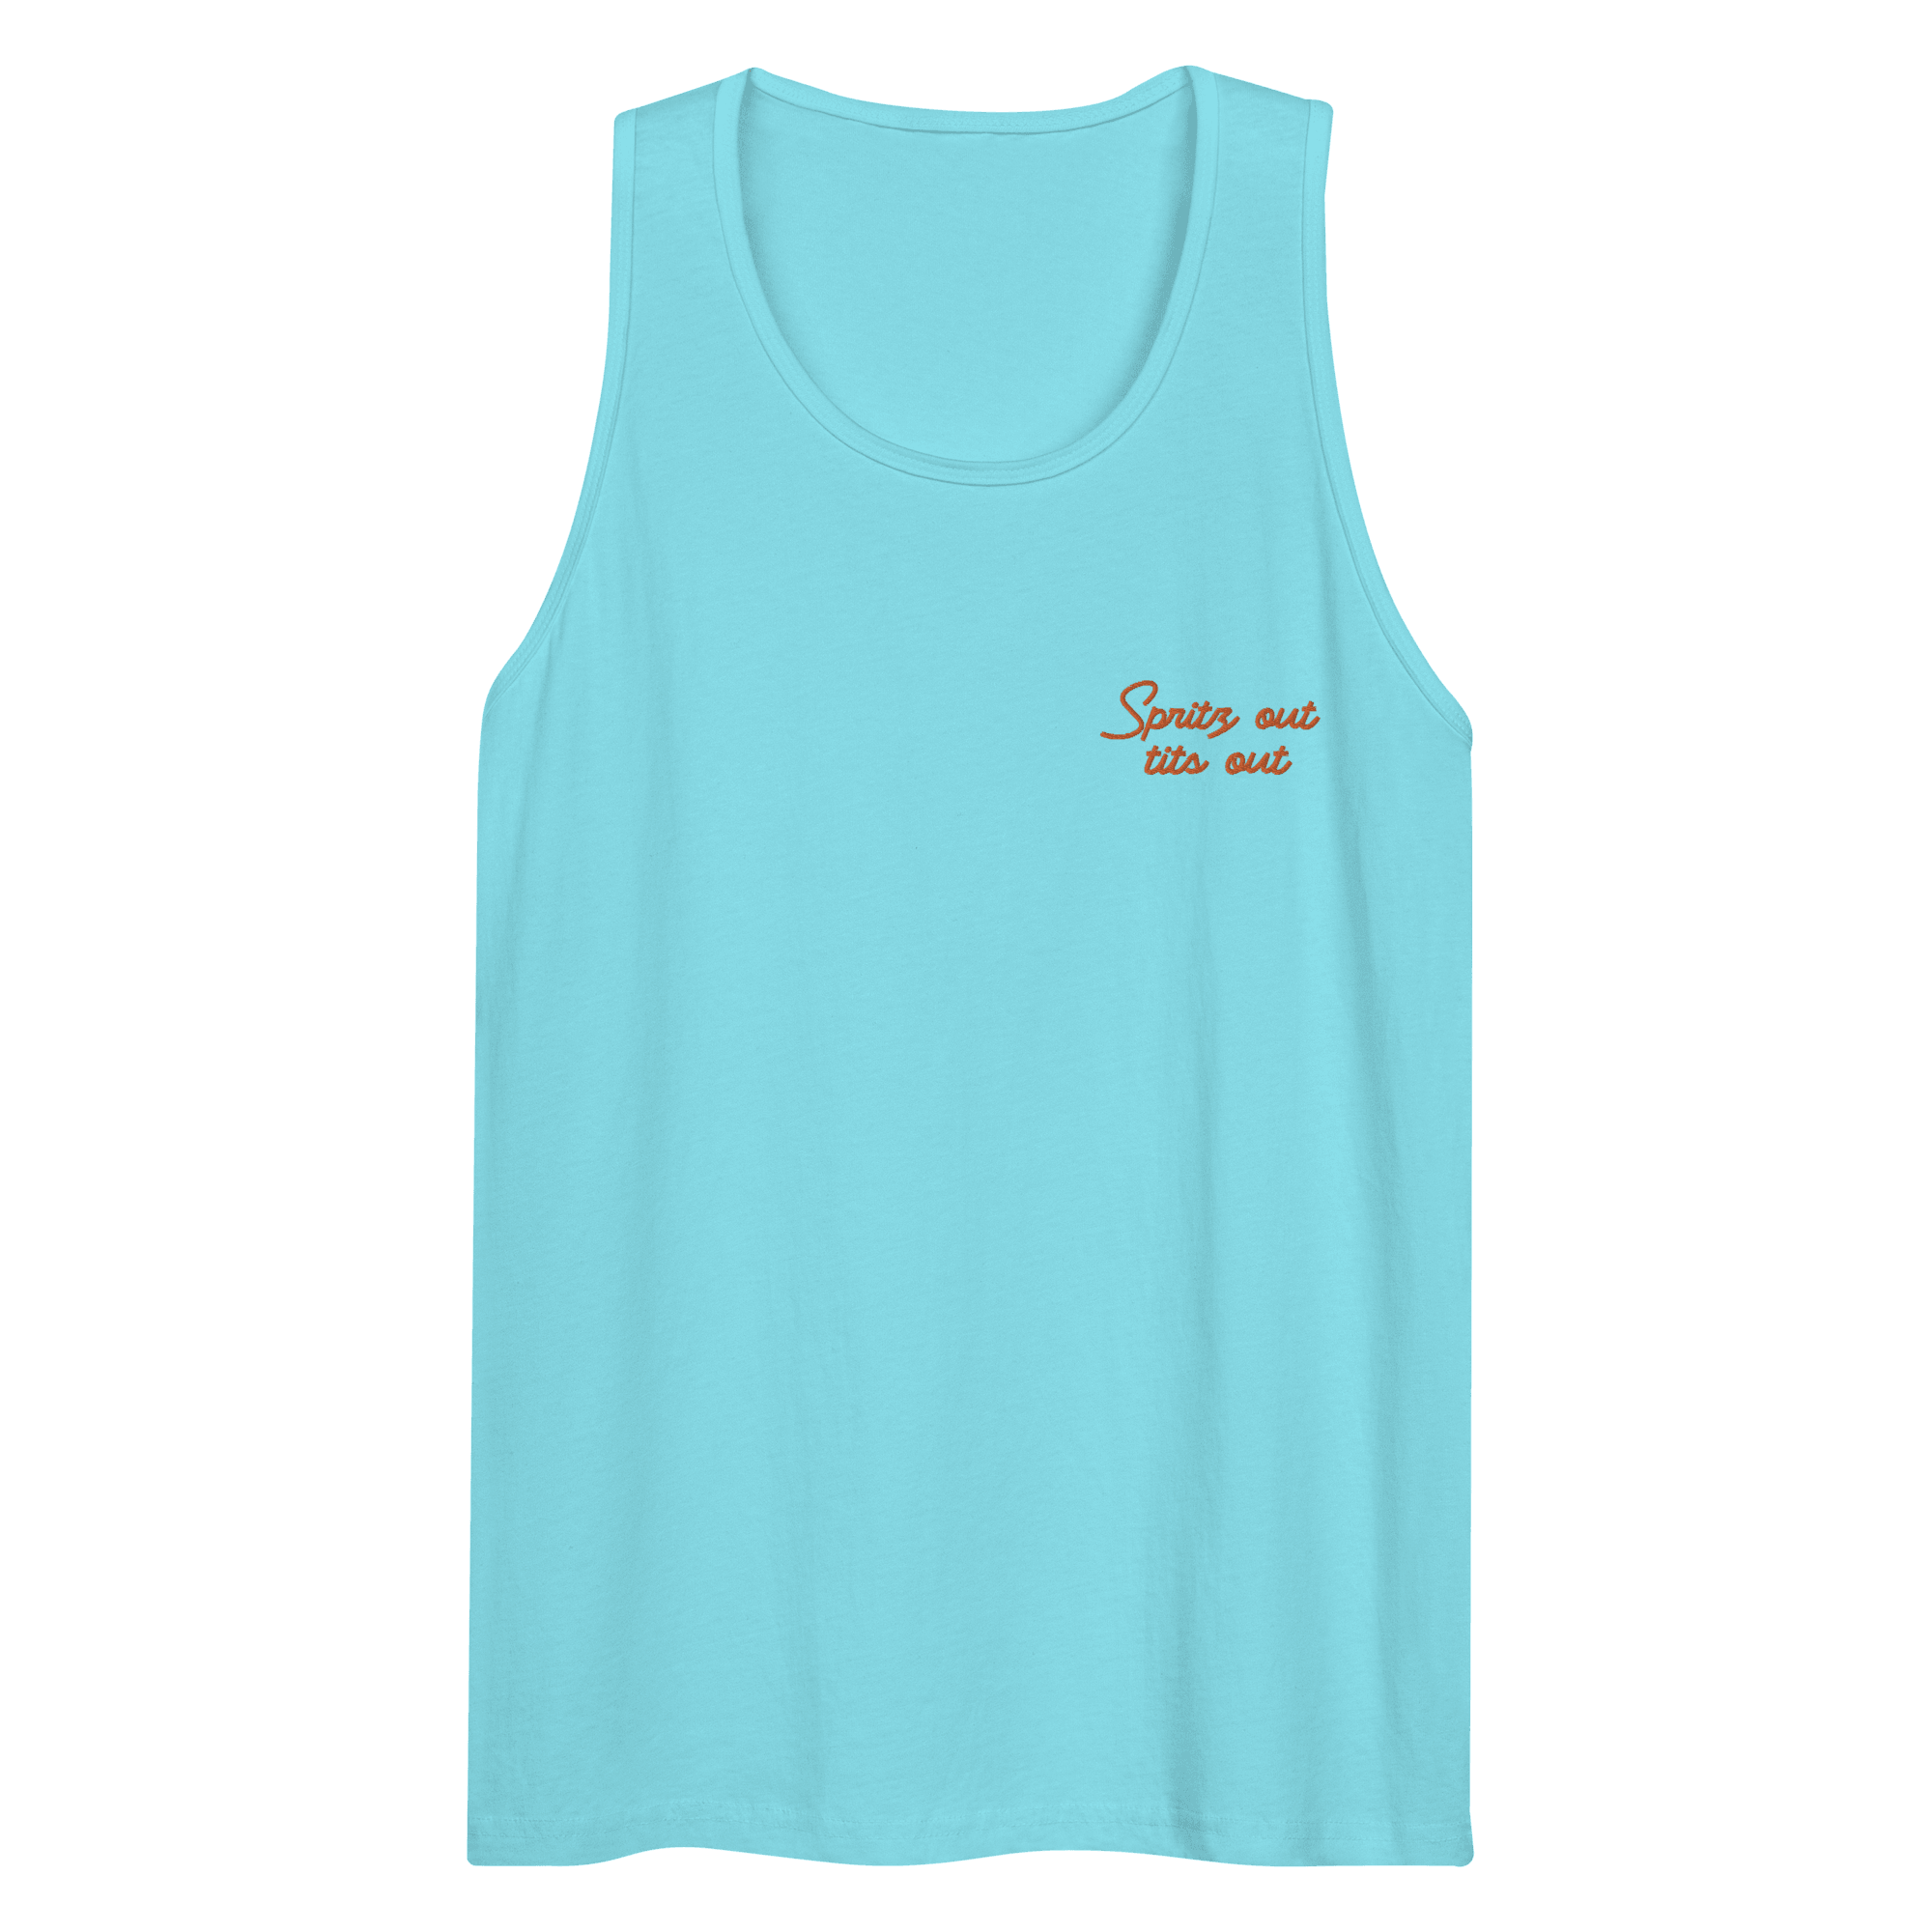 Spritz out, tits out Embroidered Men's Tank Top - Polychrome Goods 🍊